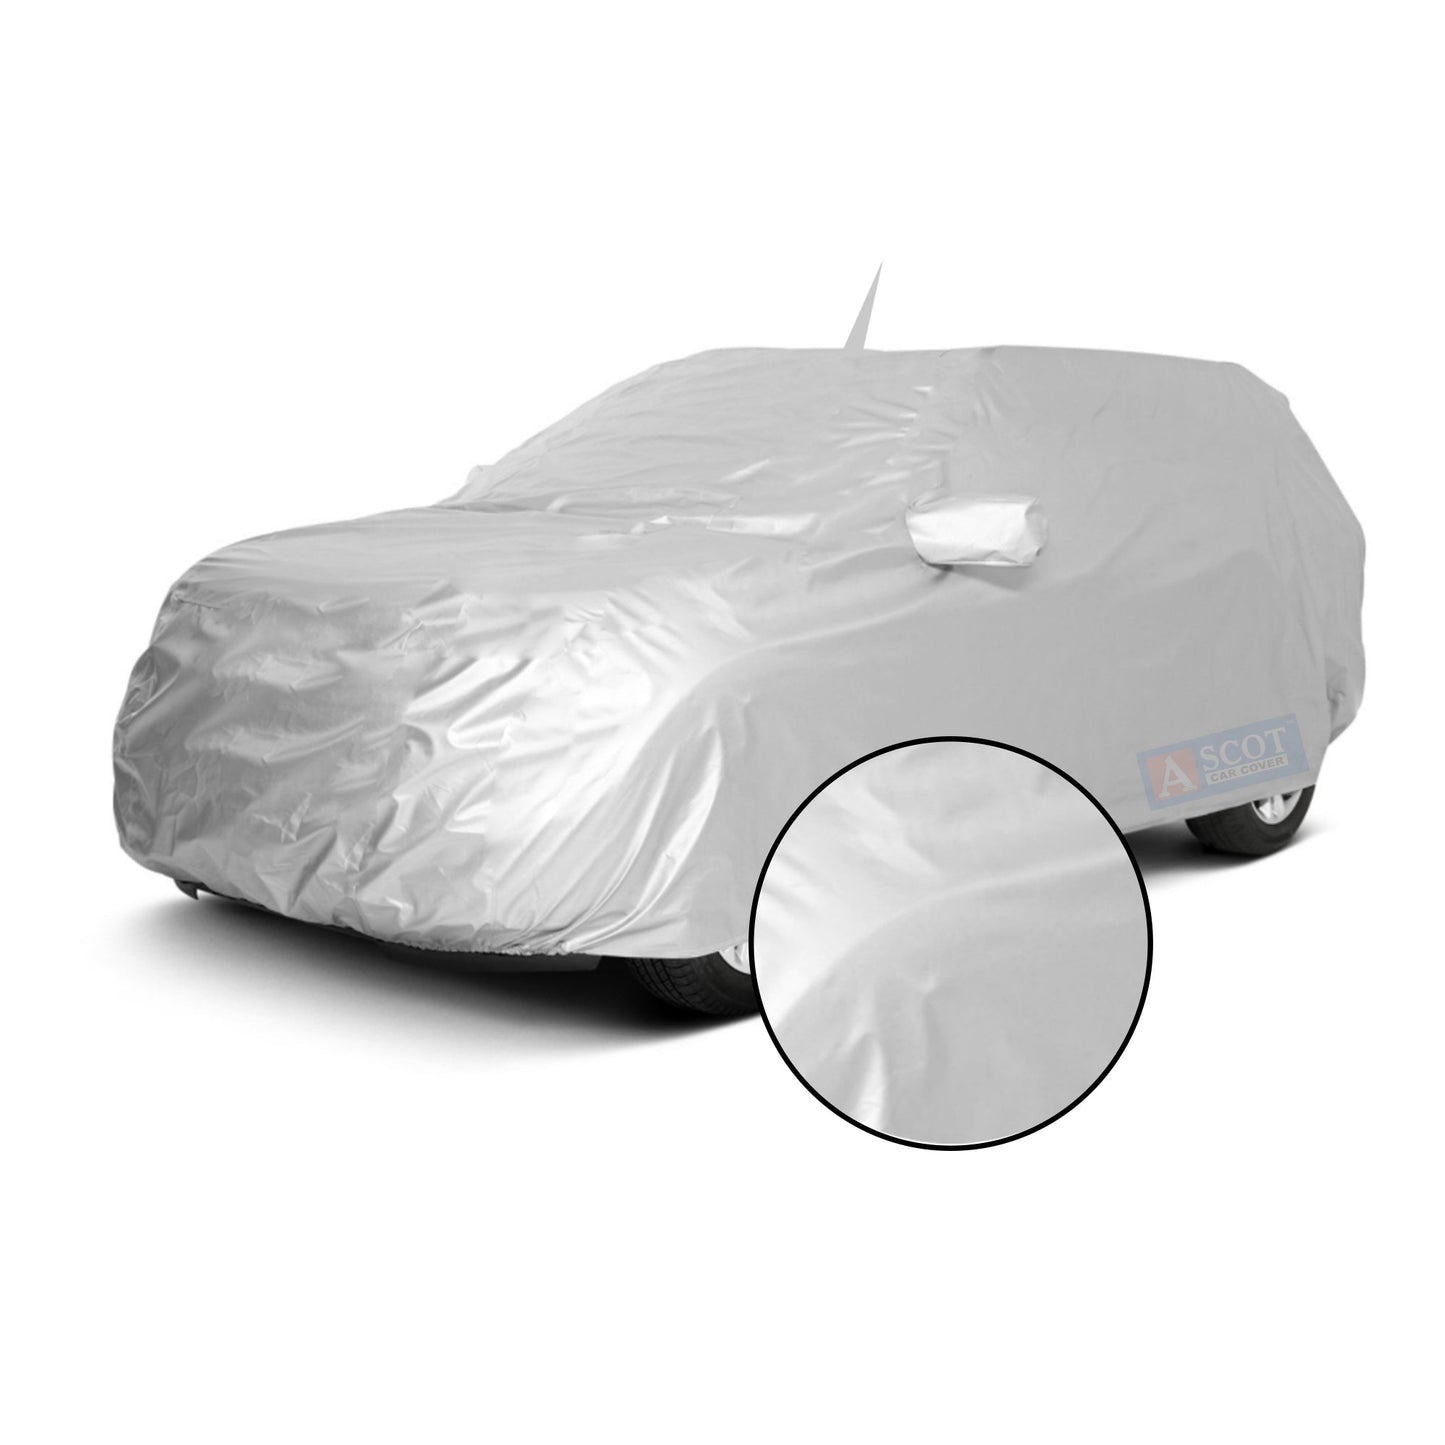 Ascot Mahindra XUV 700 Car Body Cover Dust Proof, Trippel Stitched